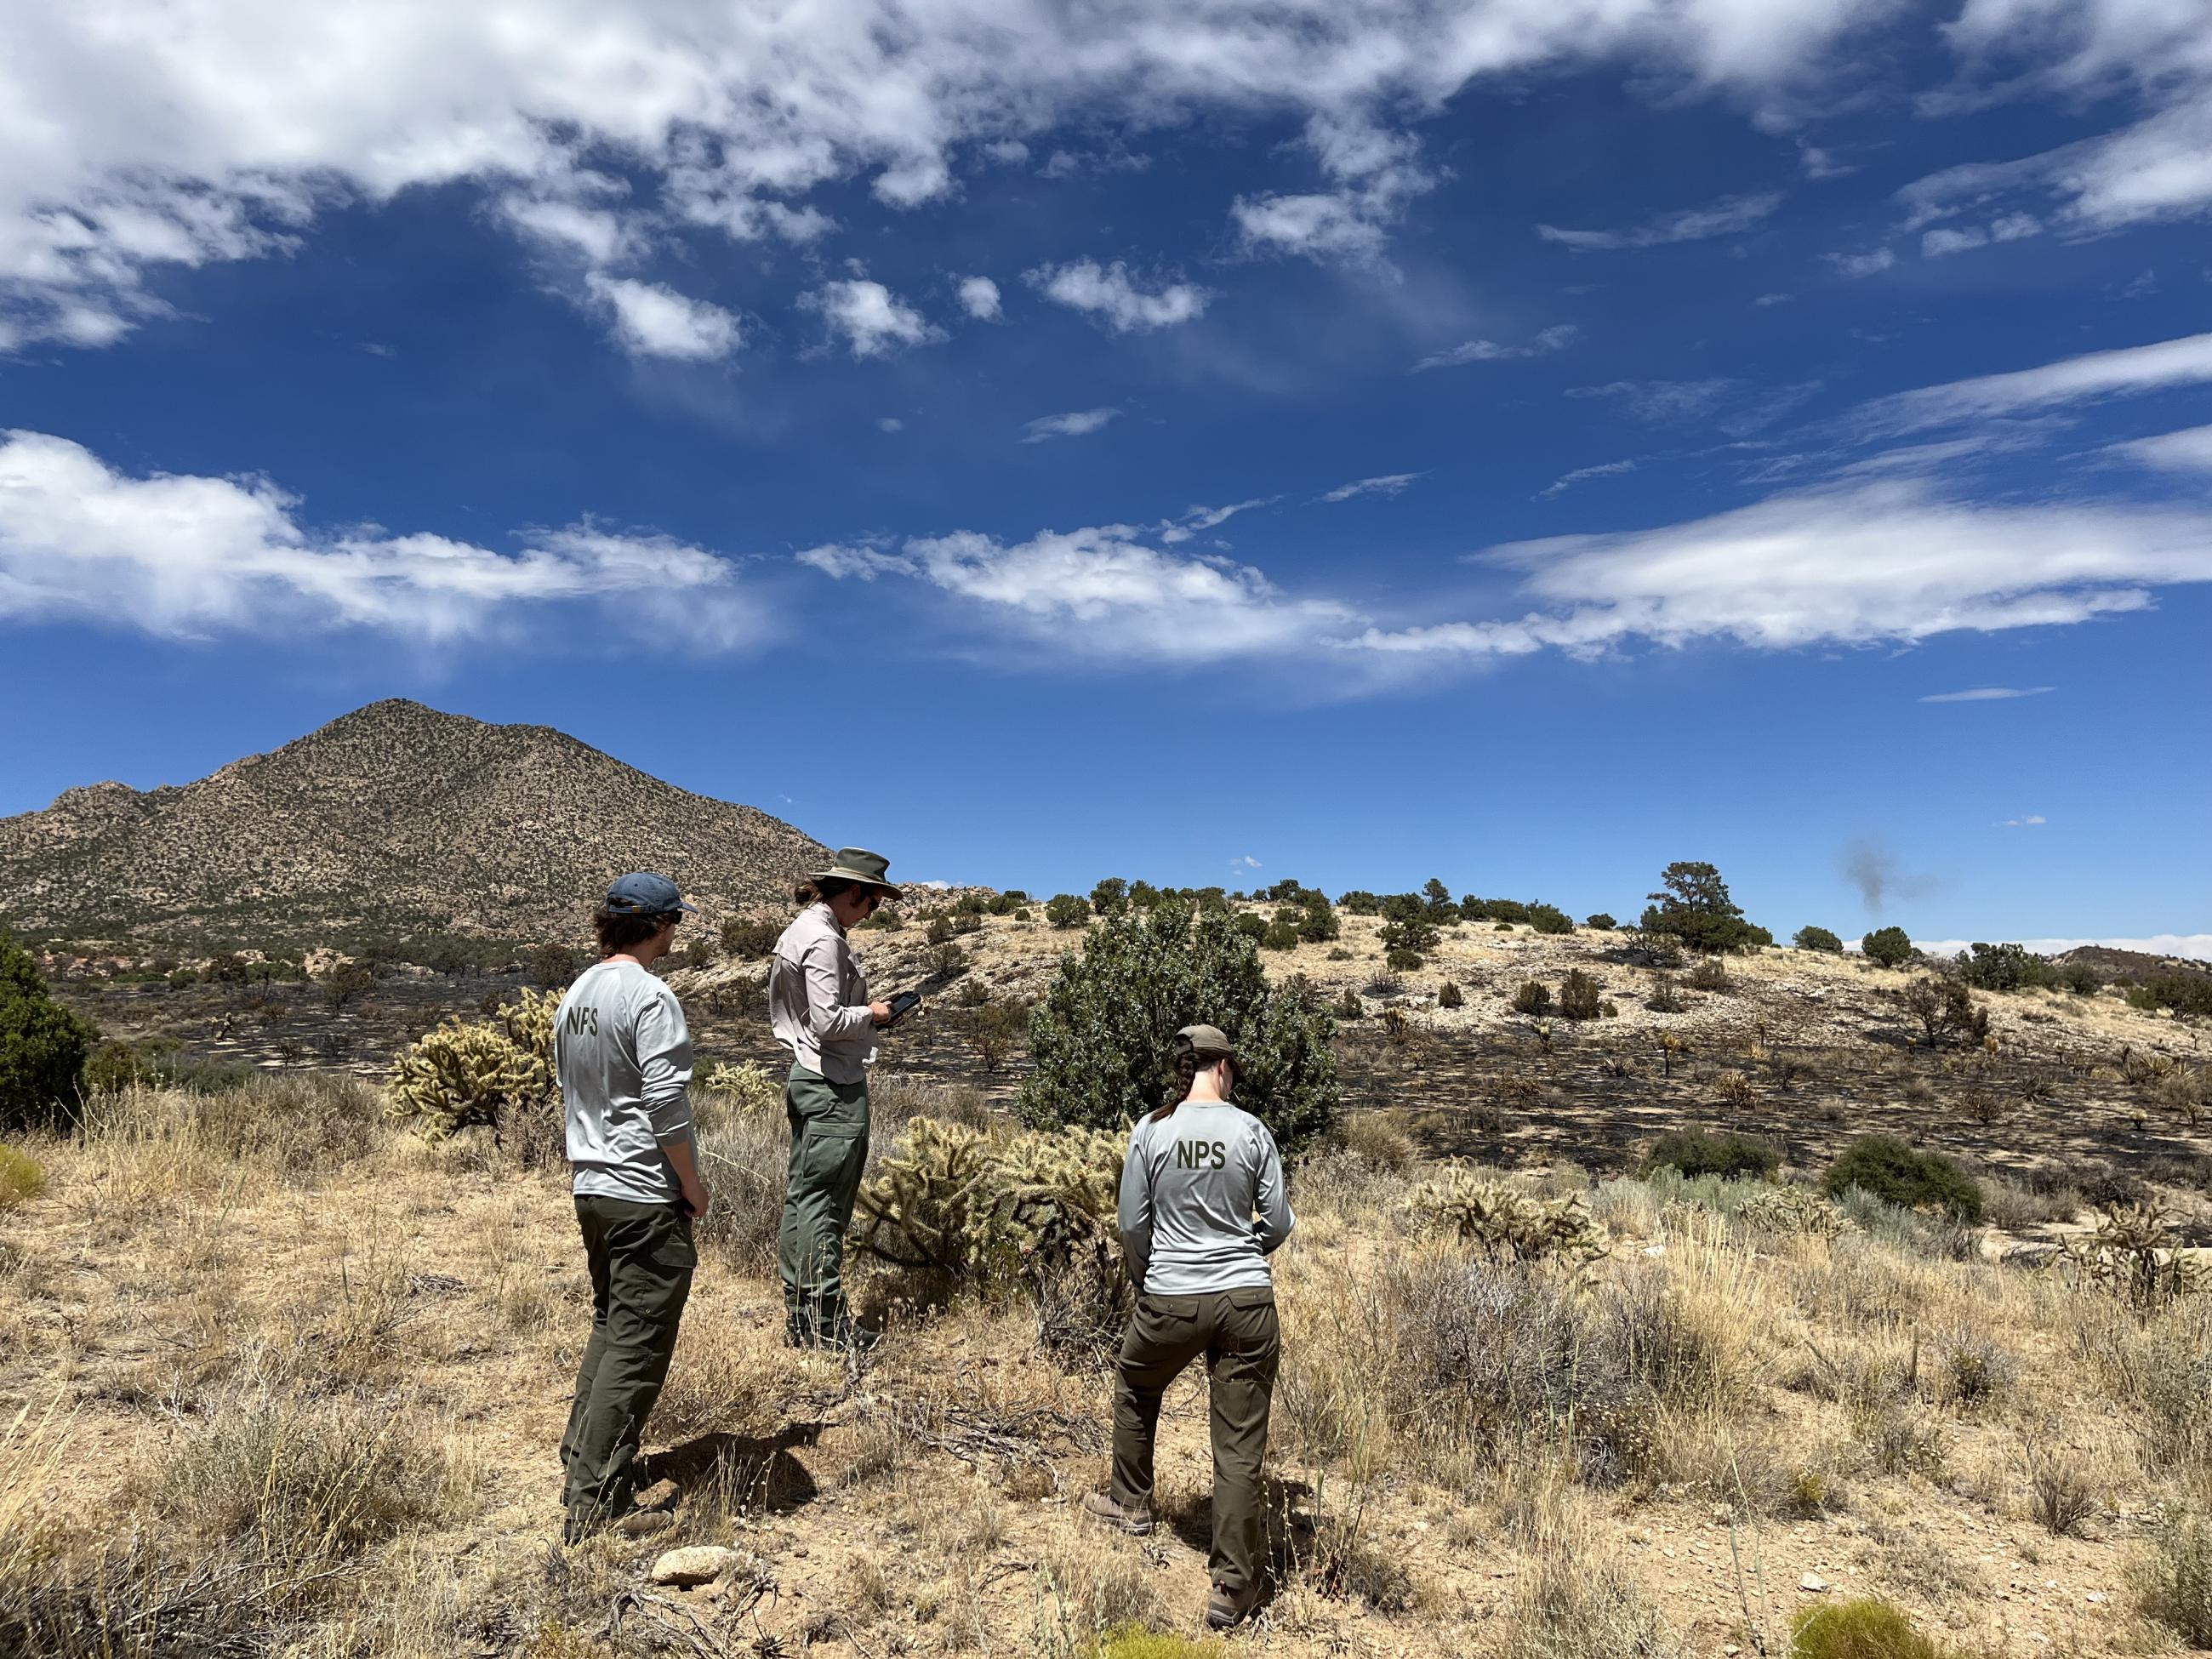 three National Park Service scientists make observations in a burnt desert area